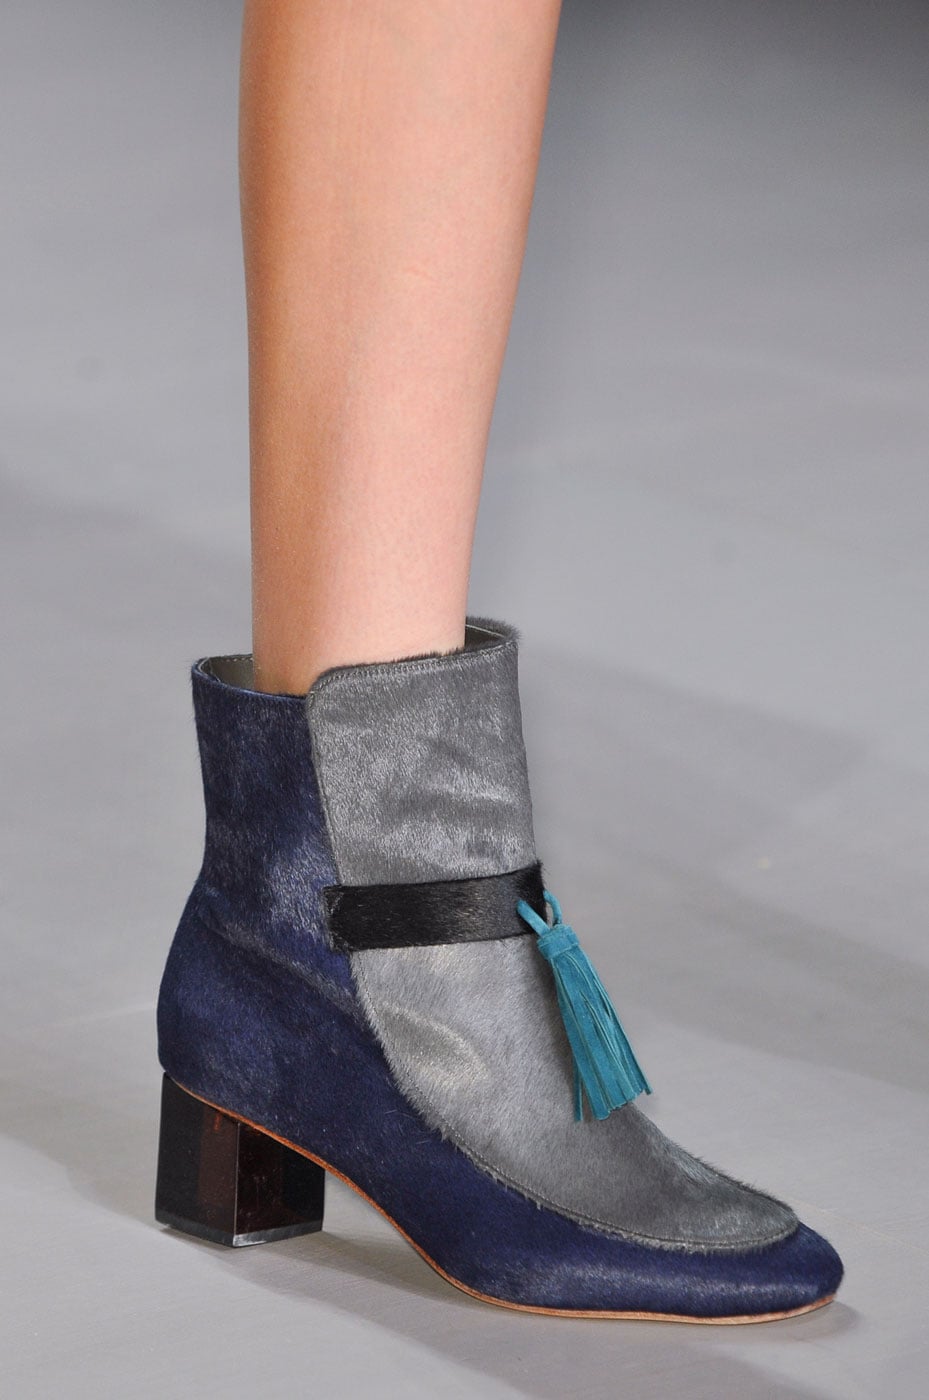 Eudon Choi Fall 2014 | What Sort of 